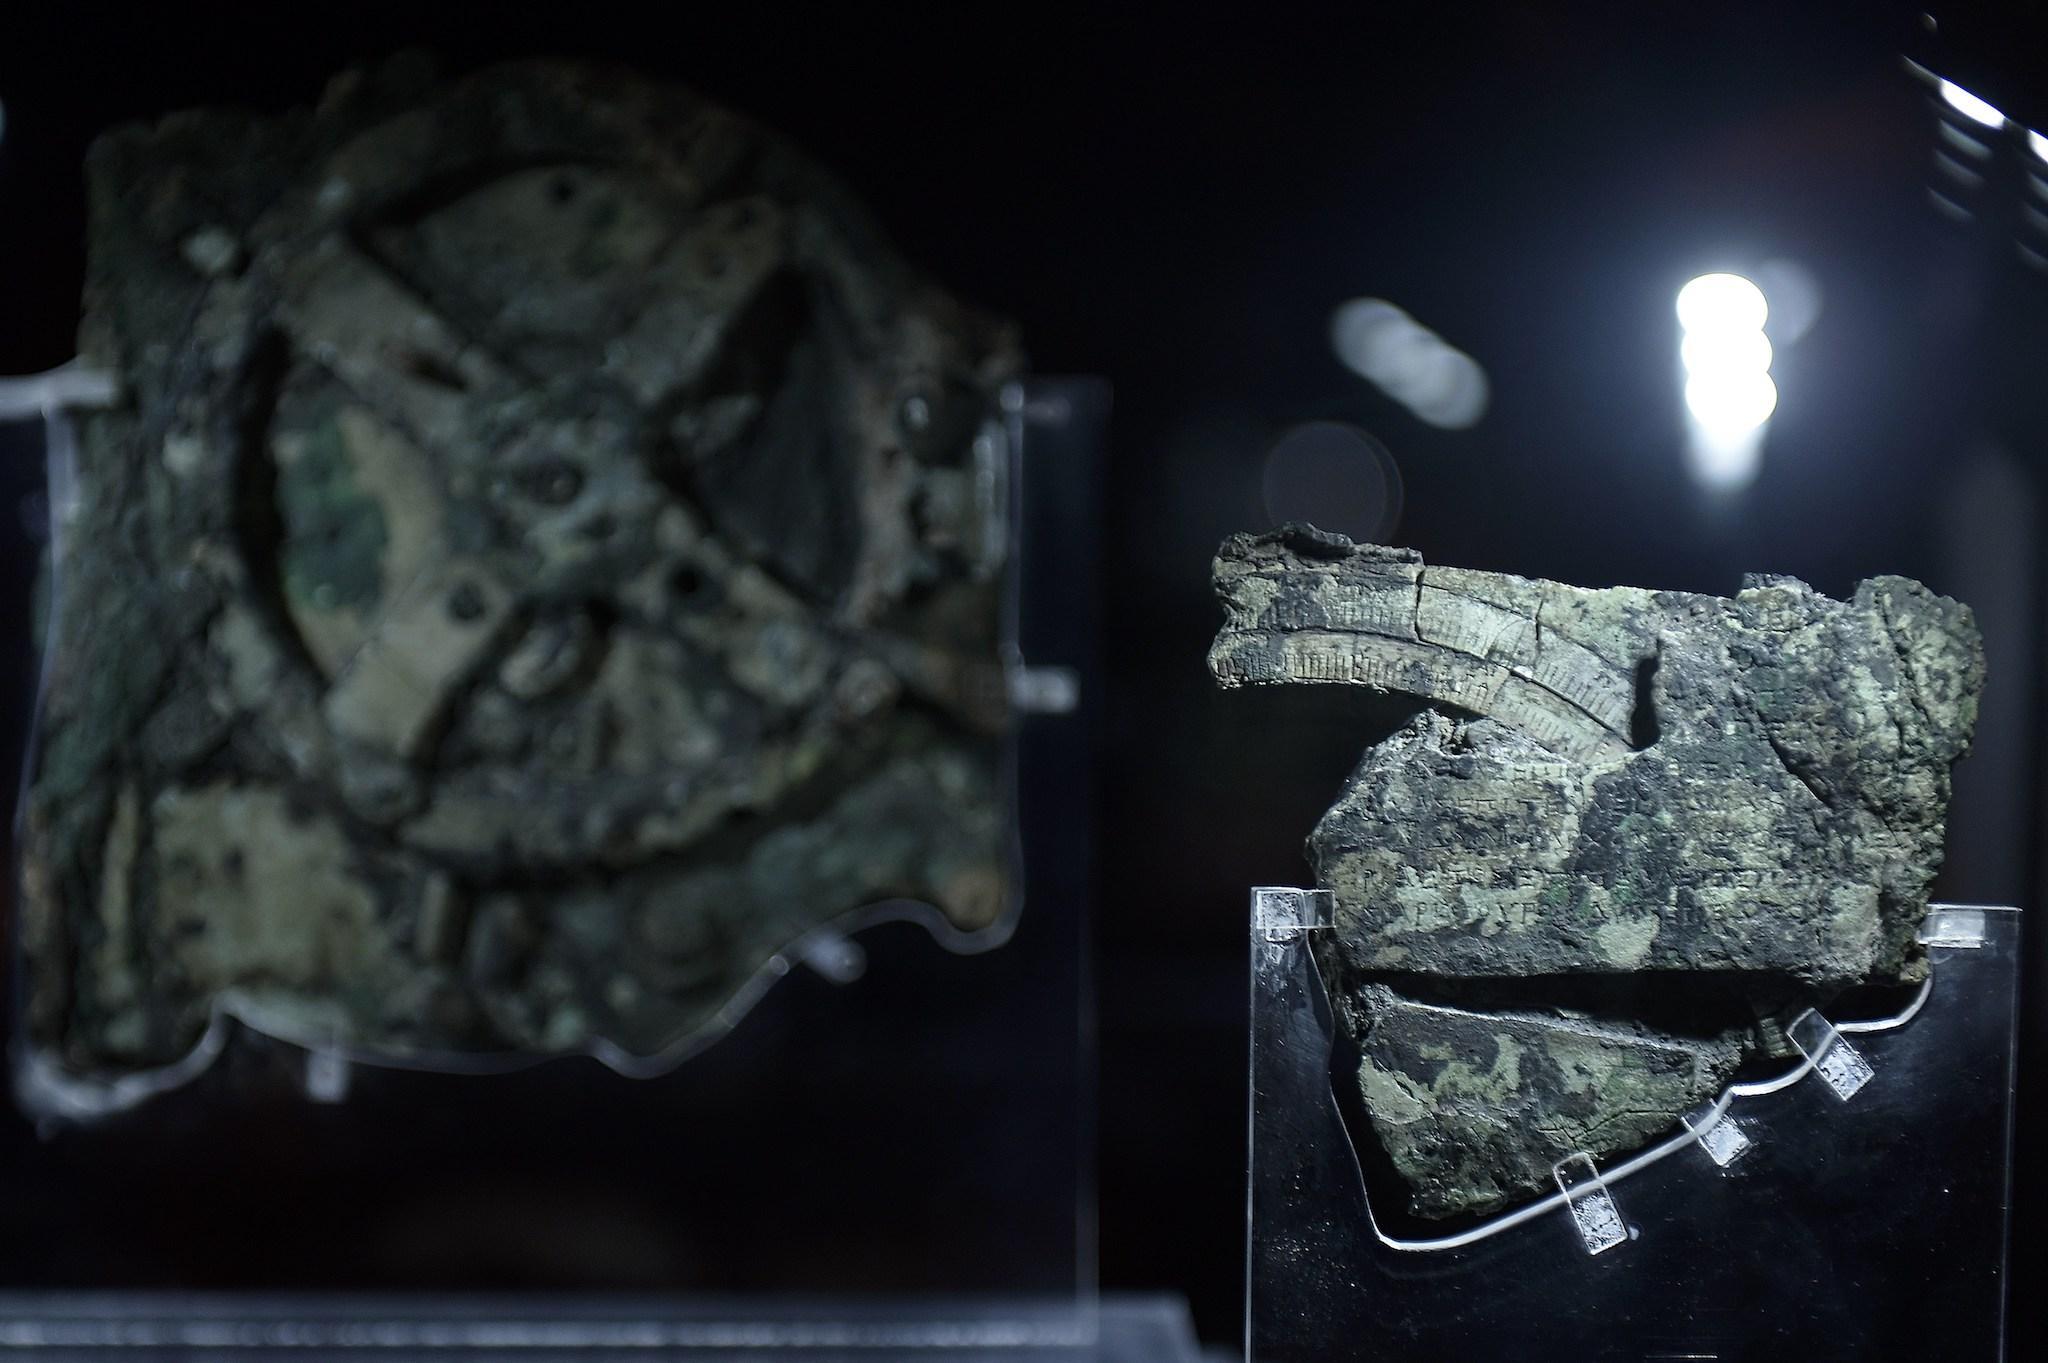 A picture taken at the Archaeological Museum in Athens on September 14, 2014 shows pieces of the so-called Antikythera Mechanism, a 2nd-century BC device known as the world's oldest computer, which was discovered by sponge divers in 1900 off a remote Greek island in the Aegean